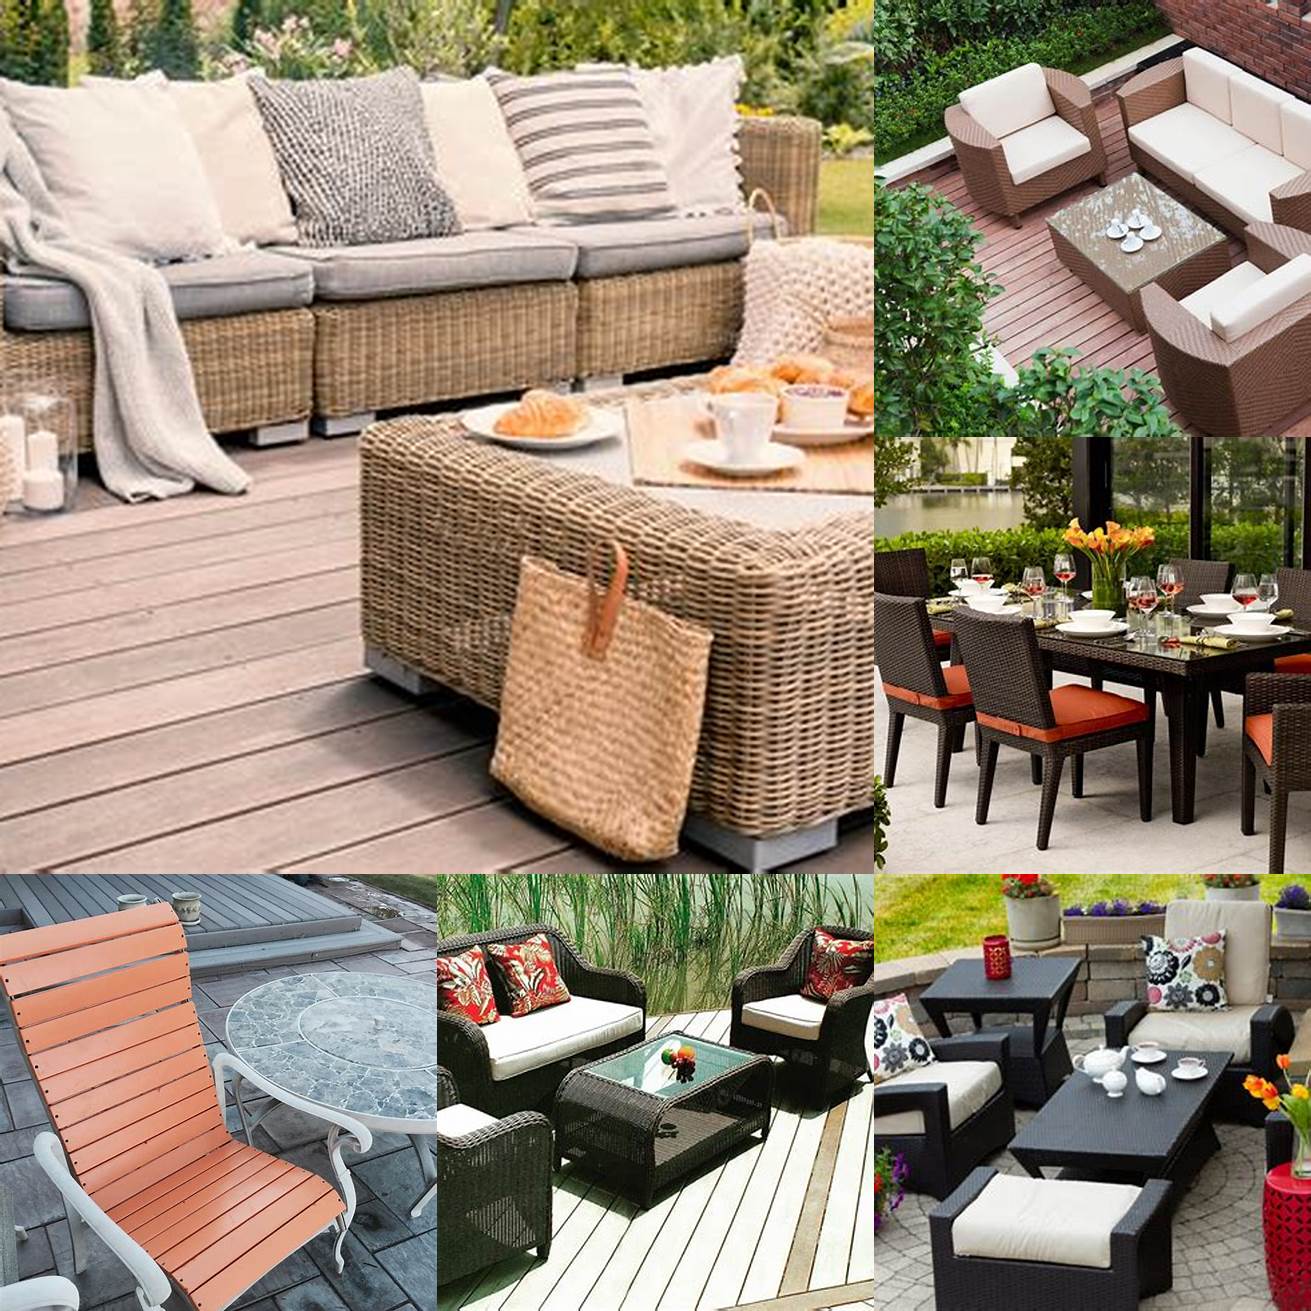 Photos of the different types of outdoor furniture